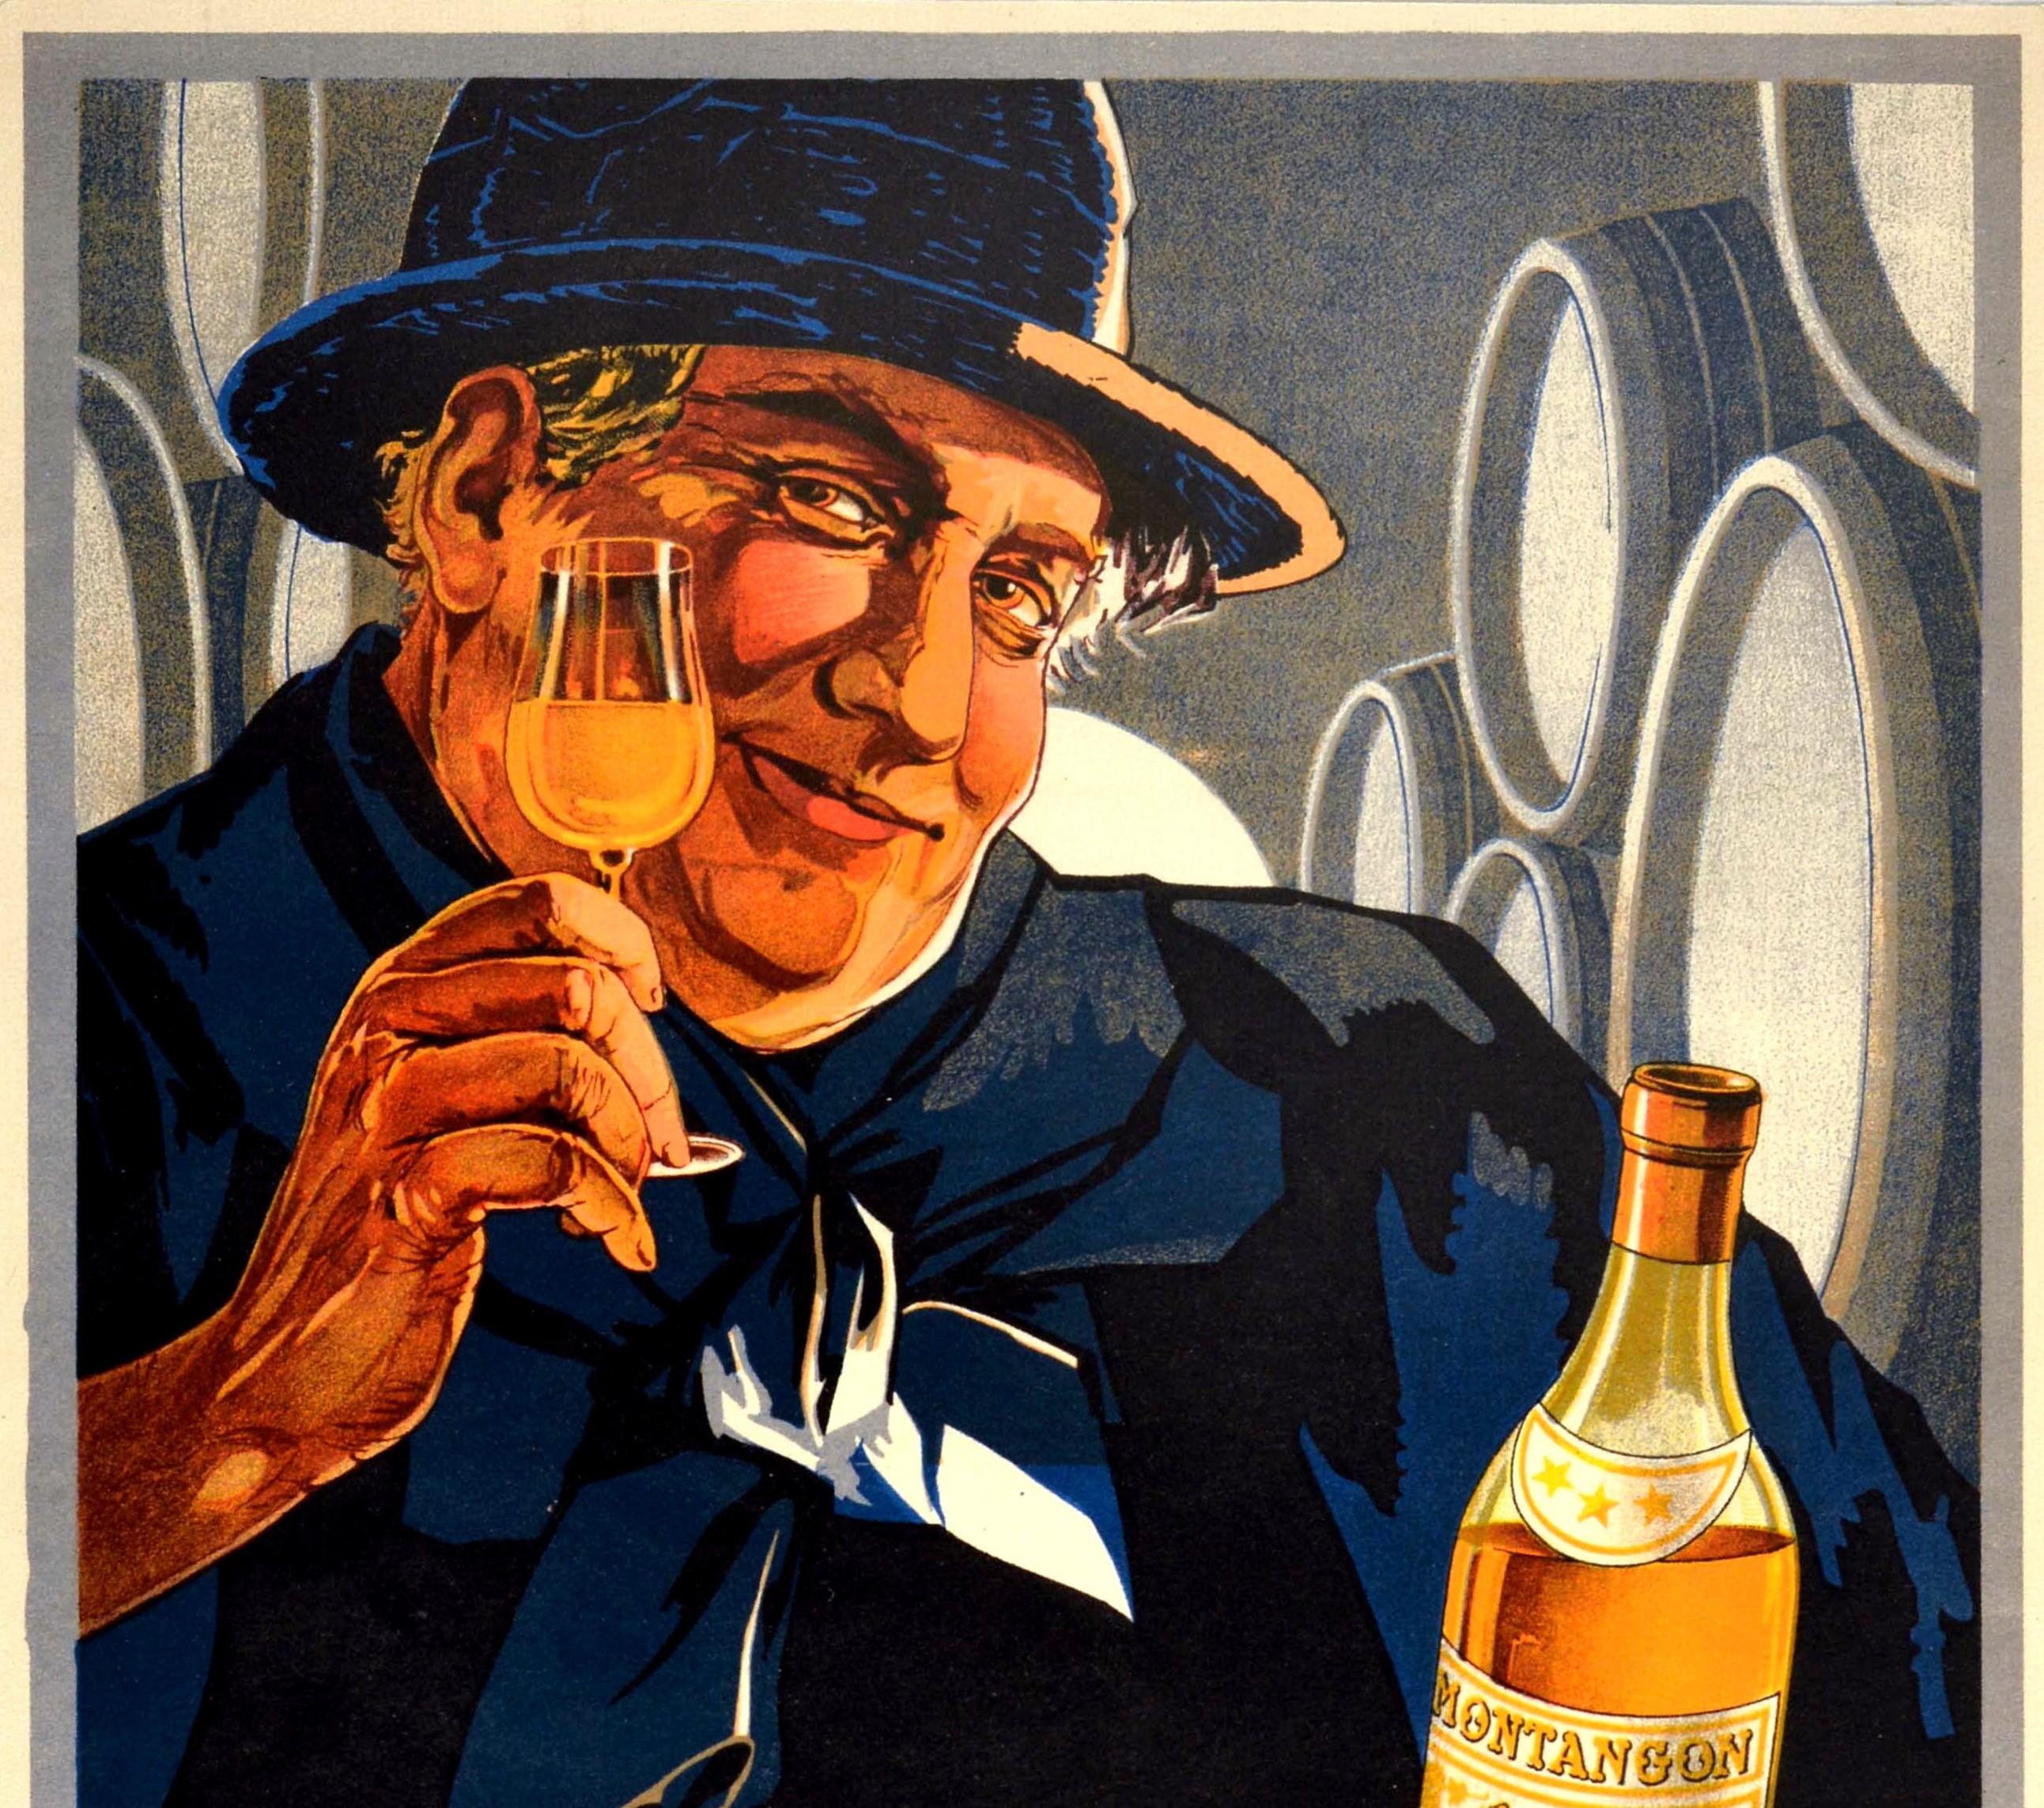 Original antique alcohol drink advertising poster for Cognac Montangon featuring a smiling man looking at the viewer and holding up a glass and a bottle of cognac with wooden cognac barrels in the background, the title in bold stylized red lettering